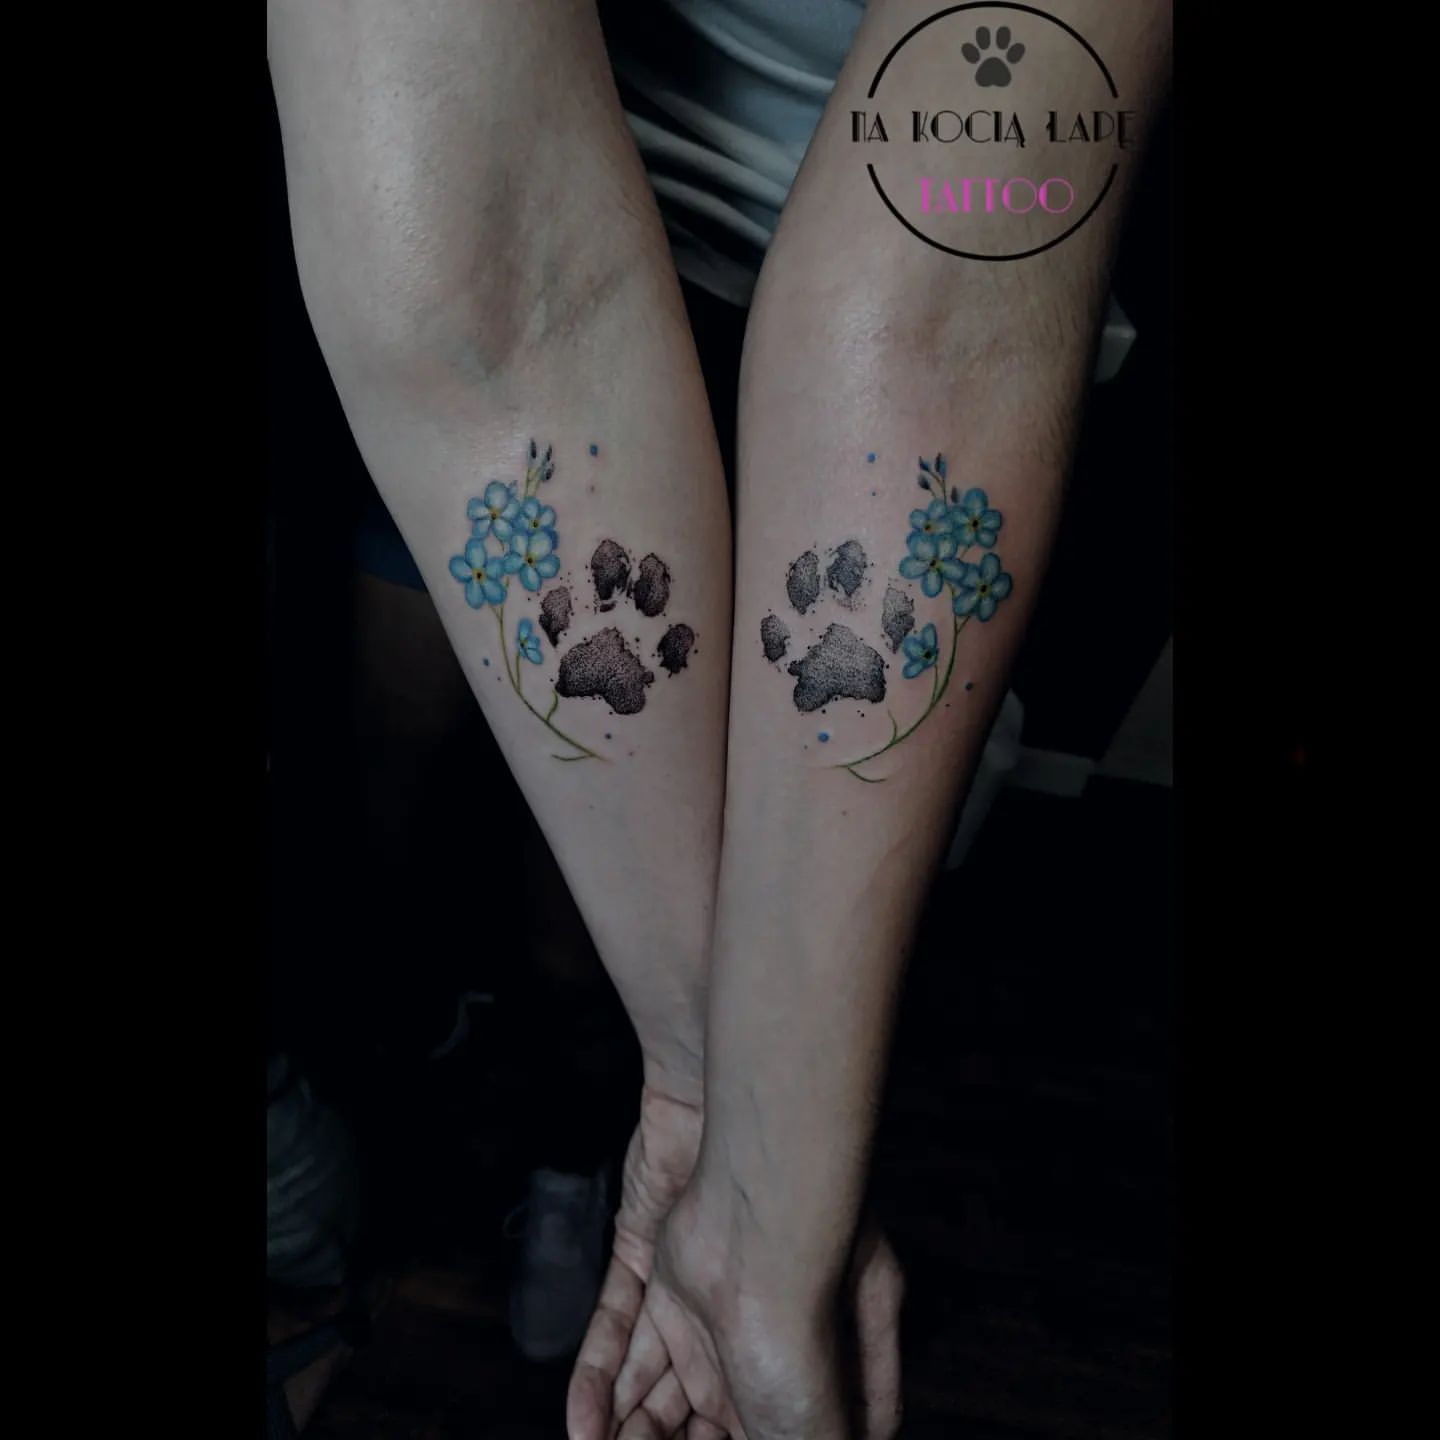 Couples Tattoo Ideas, Family Tattoo Ideas, Matching Tattoos For Couples